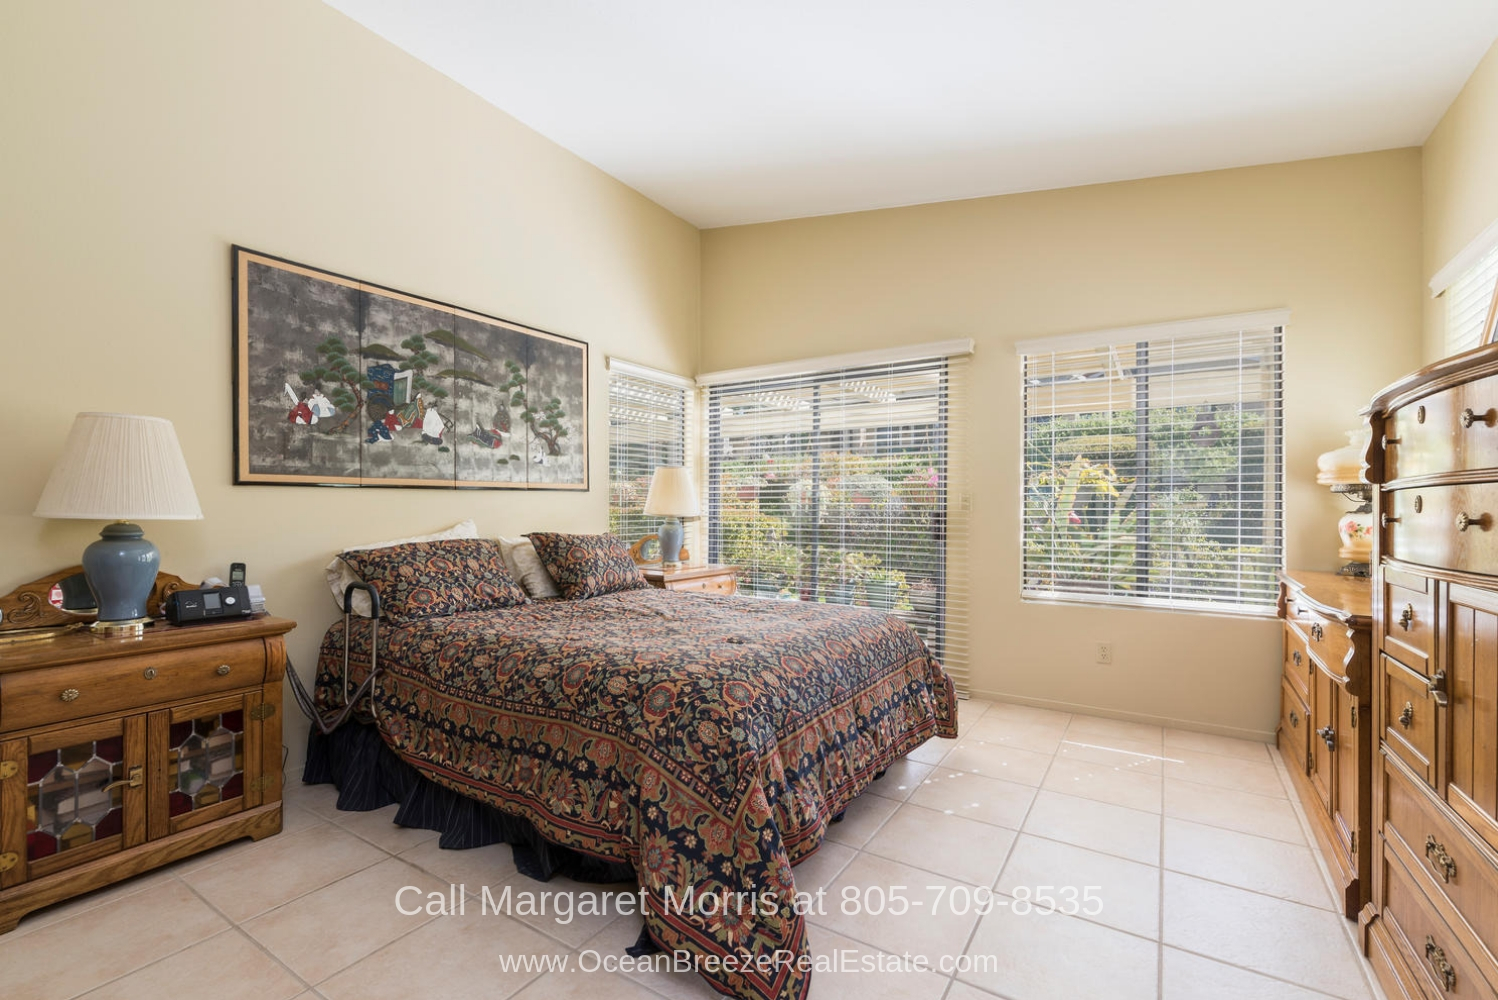 Blacklake Nipomo CA Golf Homes for Sale - Sleep your worries away in the inviting bedrooms of this Blacklake golf course home for sale. 